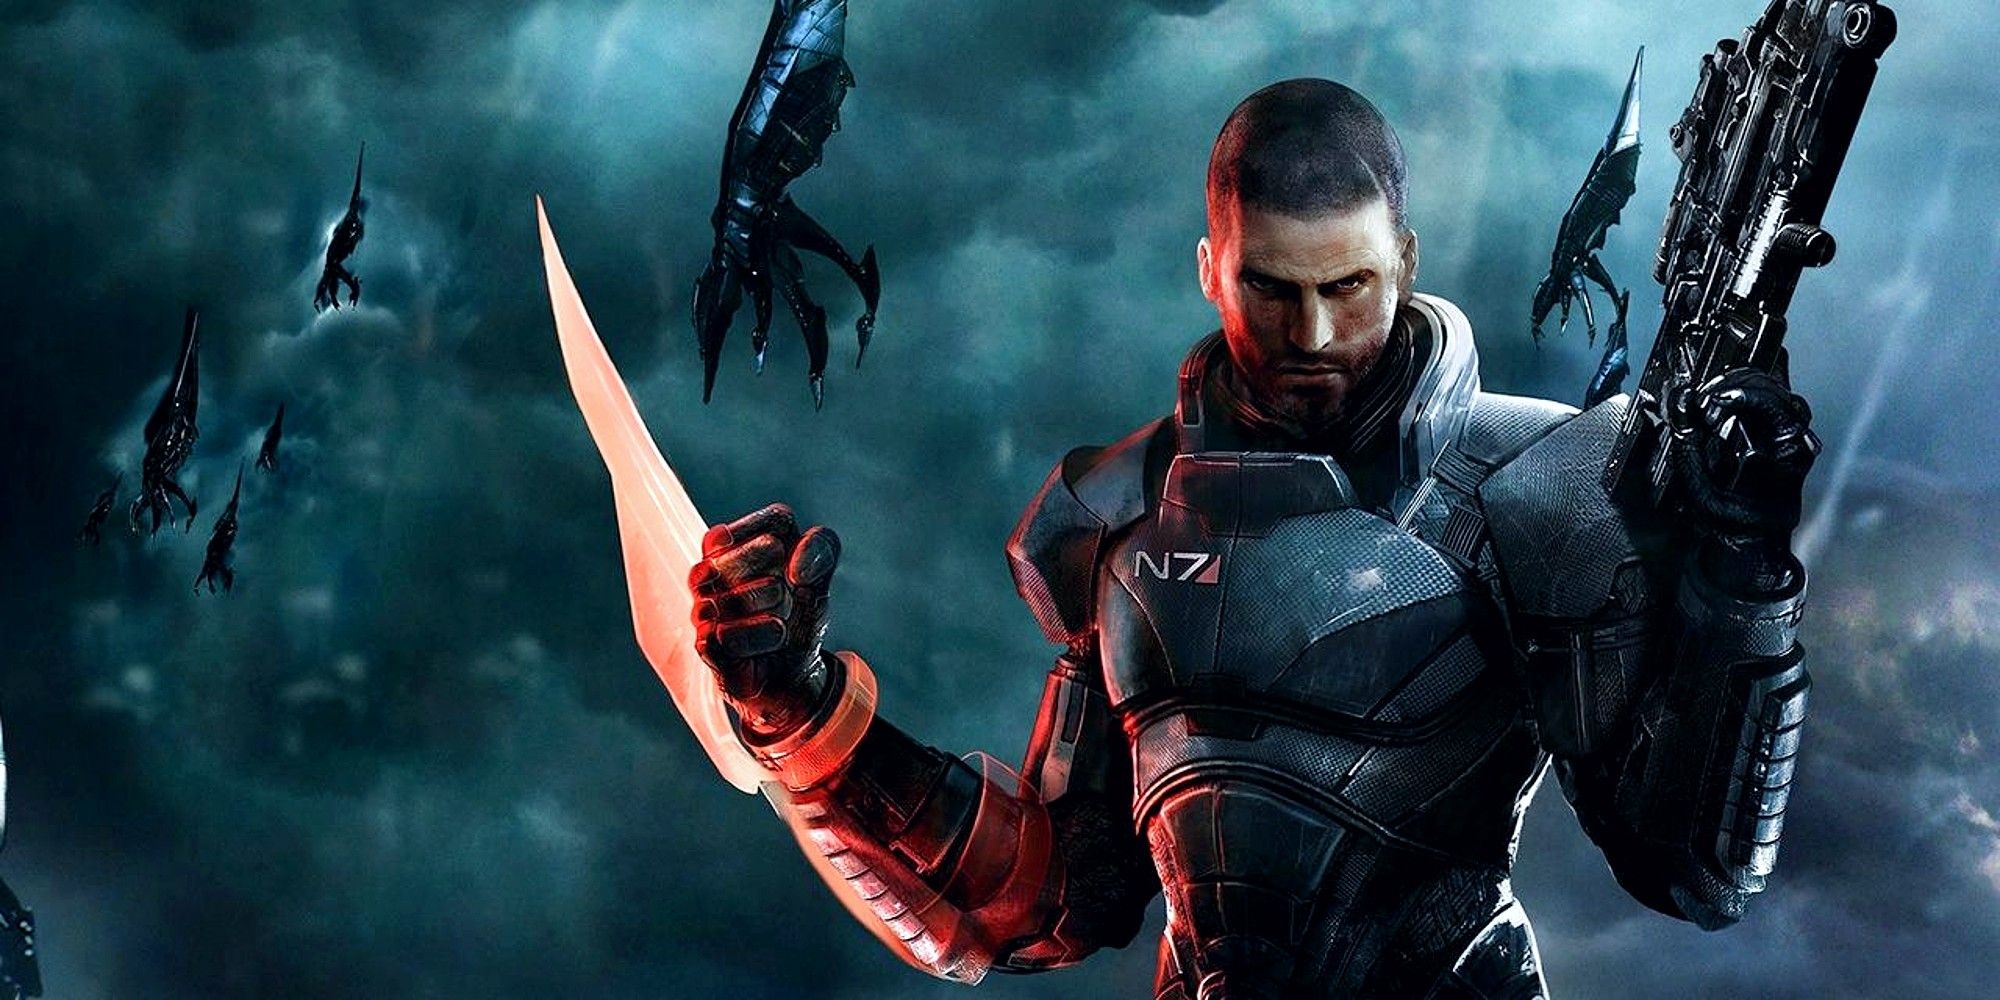 Mass Effect 3 Male Shepard With An Omni-Blade With Reaper Invasion In The Background